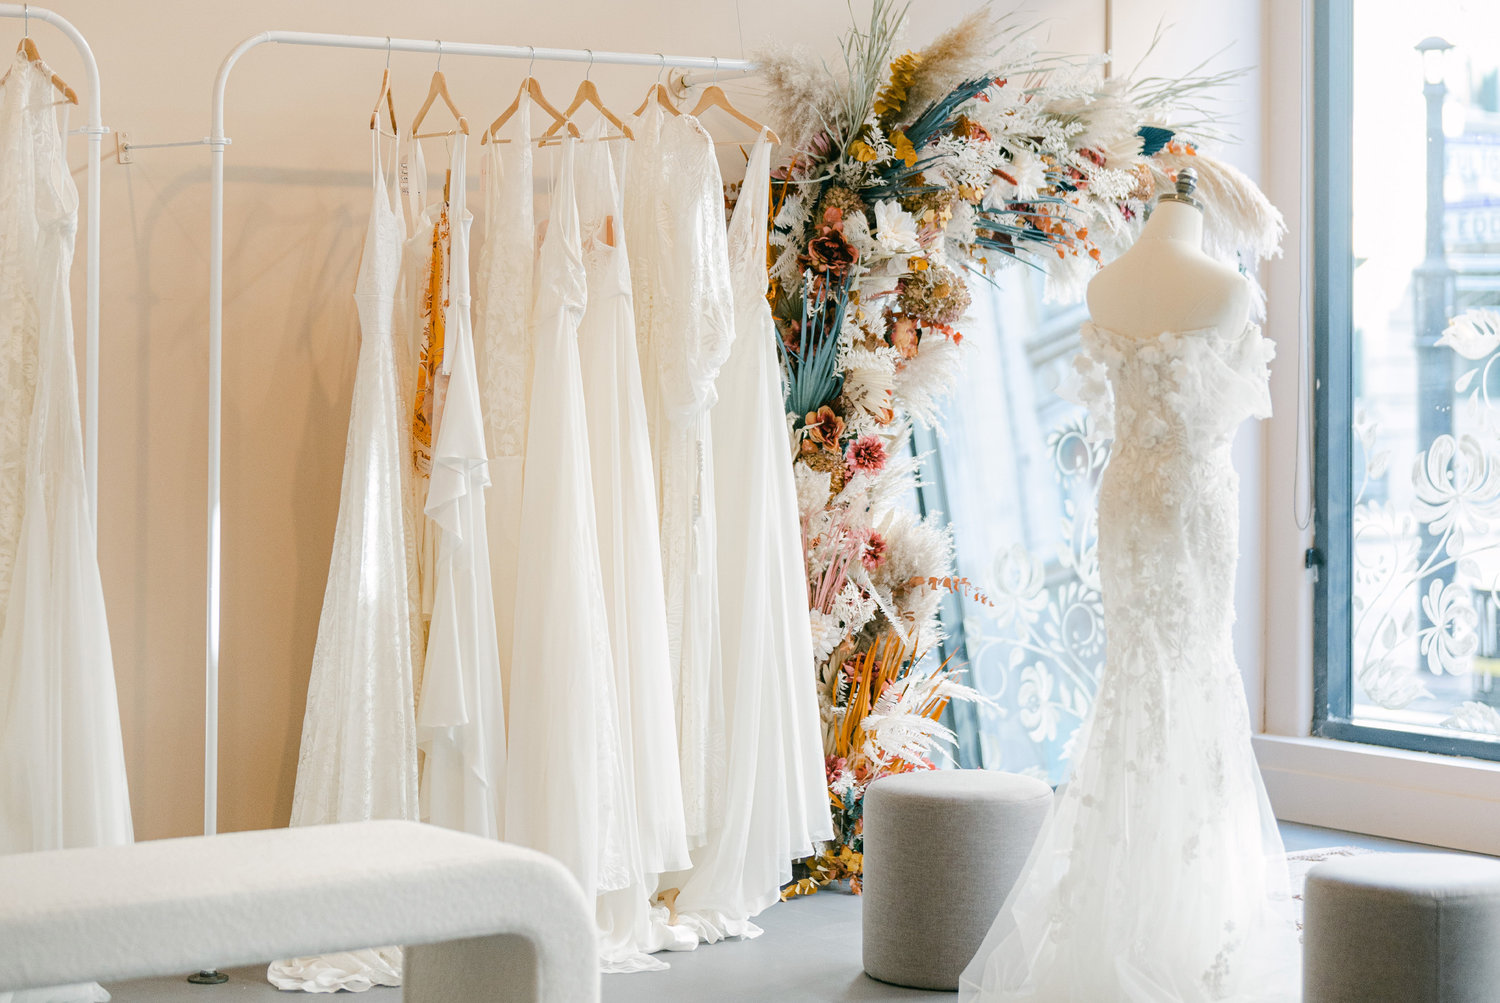 Providence’s newest bridal boutique offers indie styles for all